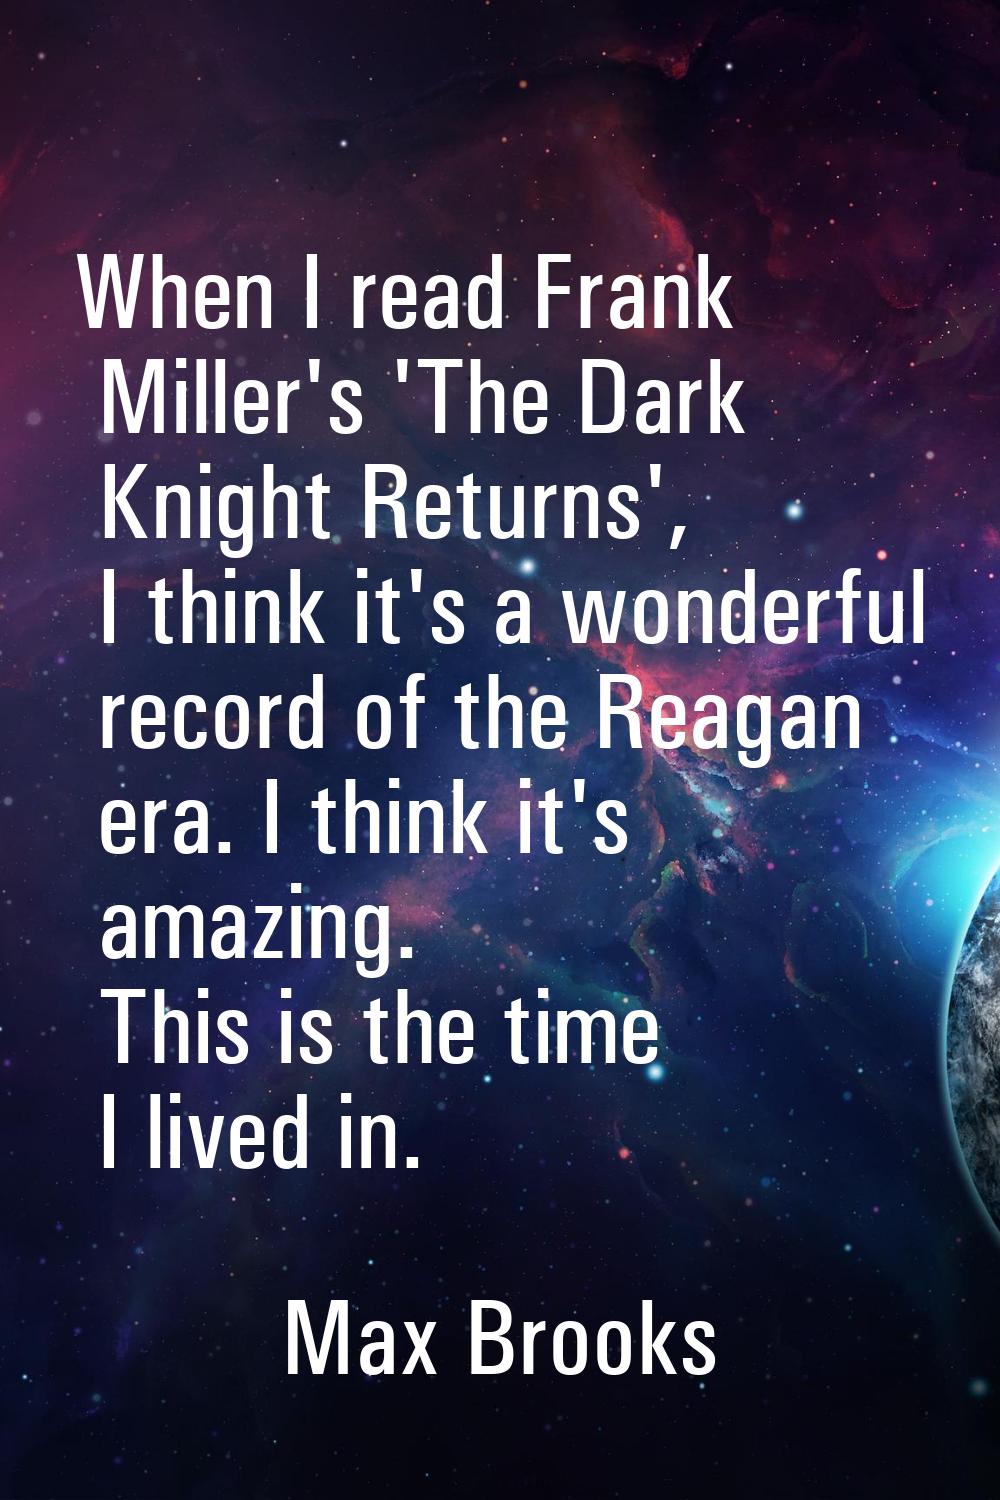 When I read Frank Miller's 'The Dark Knight Returns', I think it's a wonderful record of the Reagan